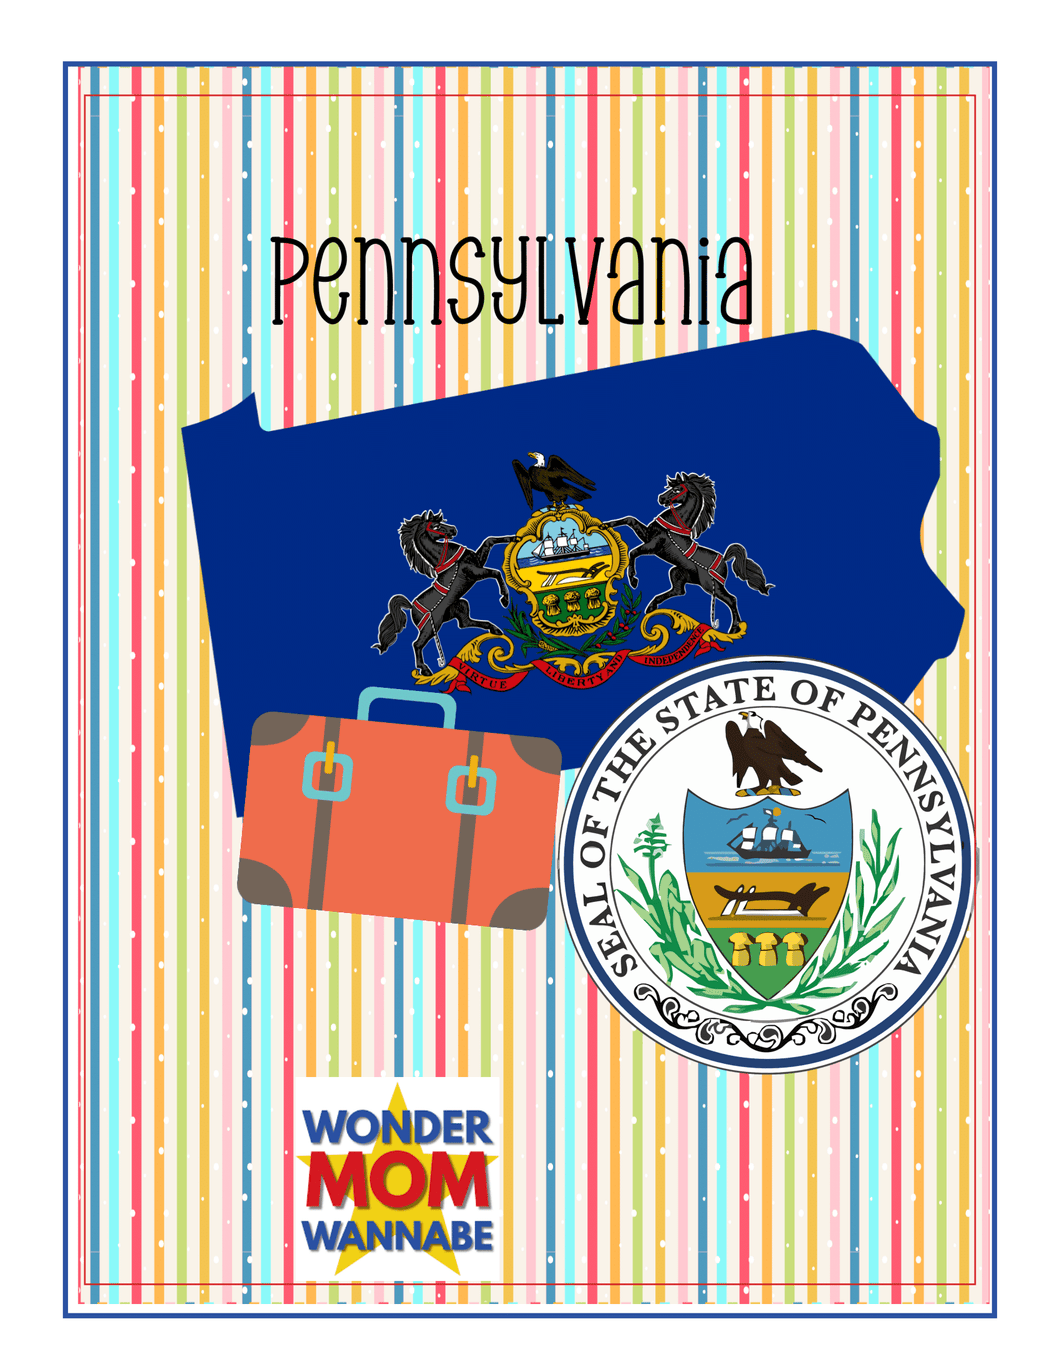 Pennsylvania Travel Guide and Activity Kit for Kids